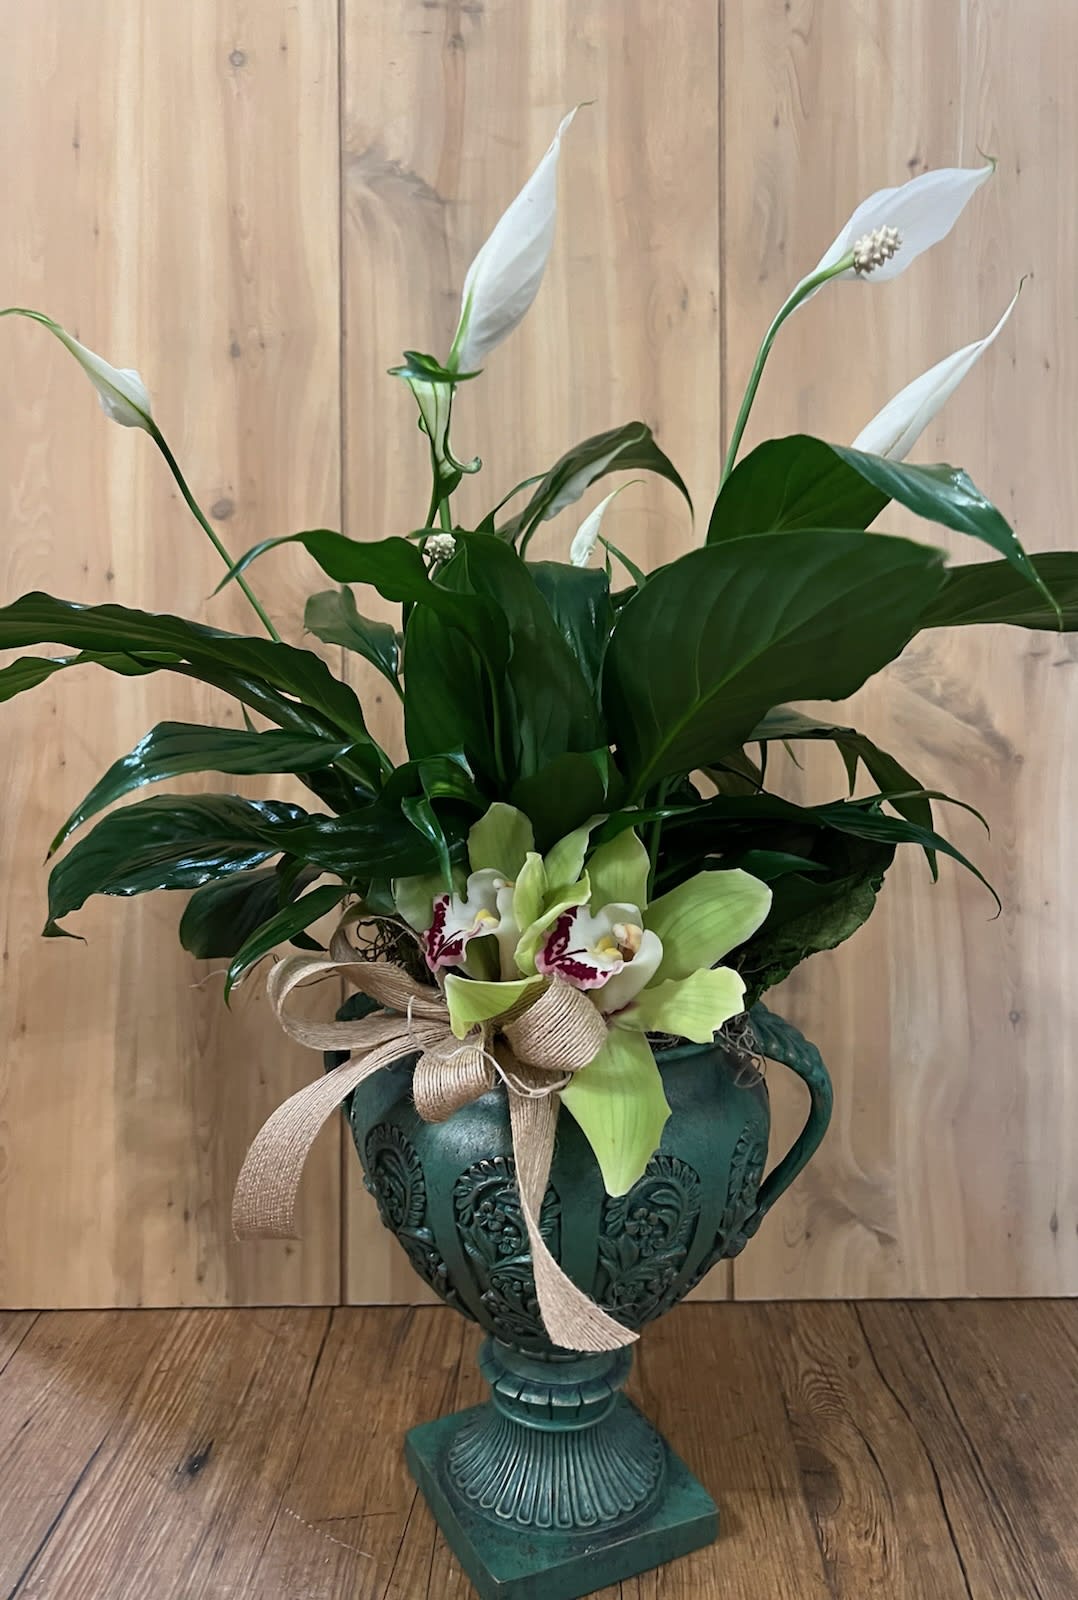 Green Garden of Delight - A beautiful Peace Lily (Spathiphyllum) with accents of green cymbidium orchids in a classic green urn.